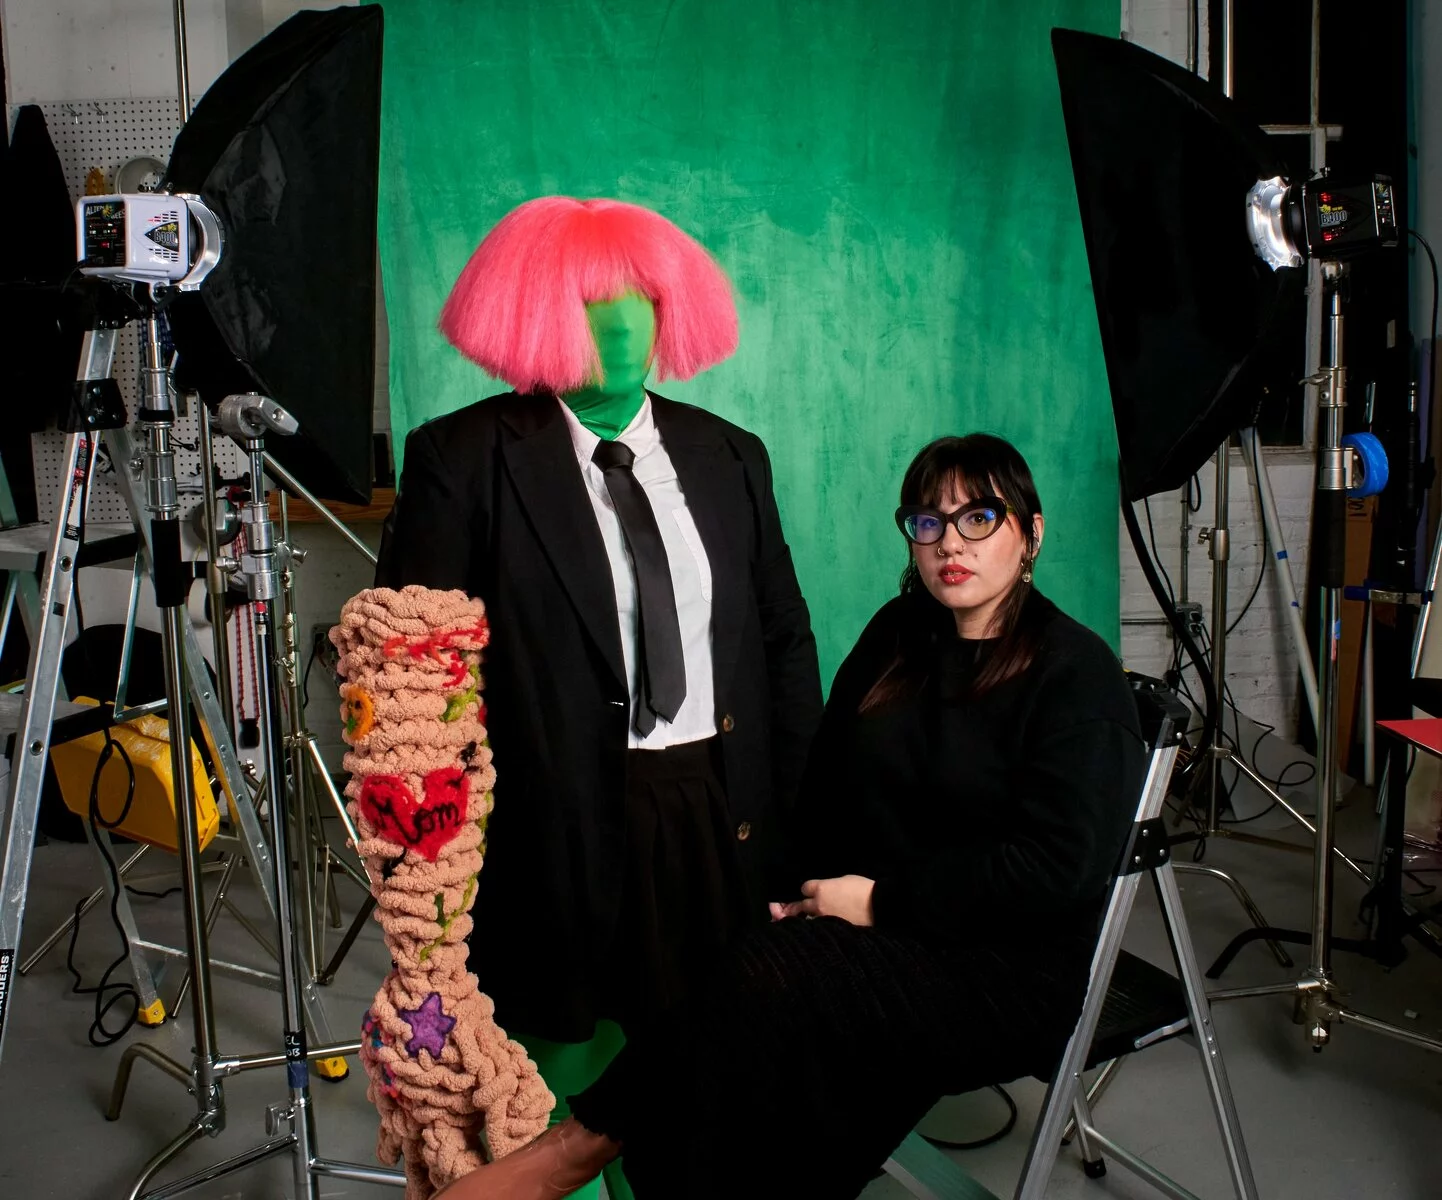 Ariella Granados sits in front of a green screen in a photography studio surrounded by props and equipment.